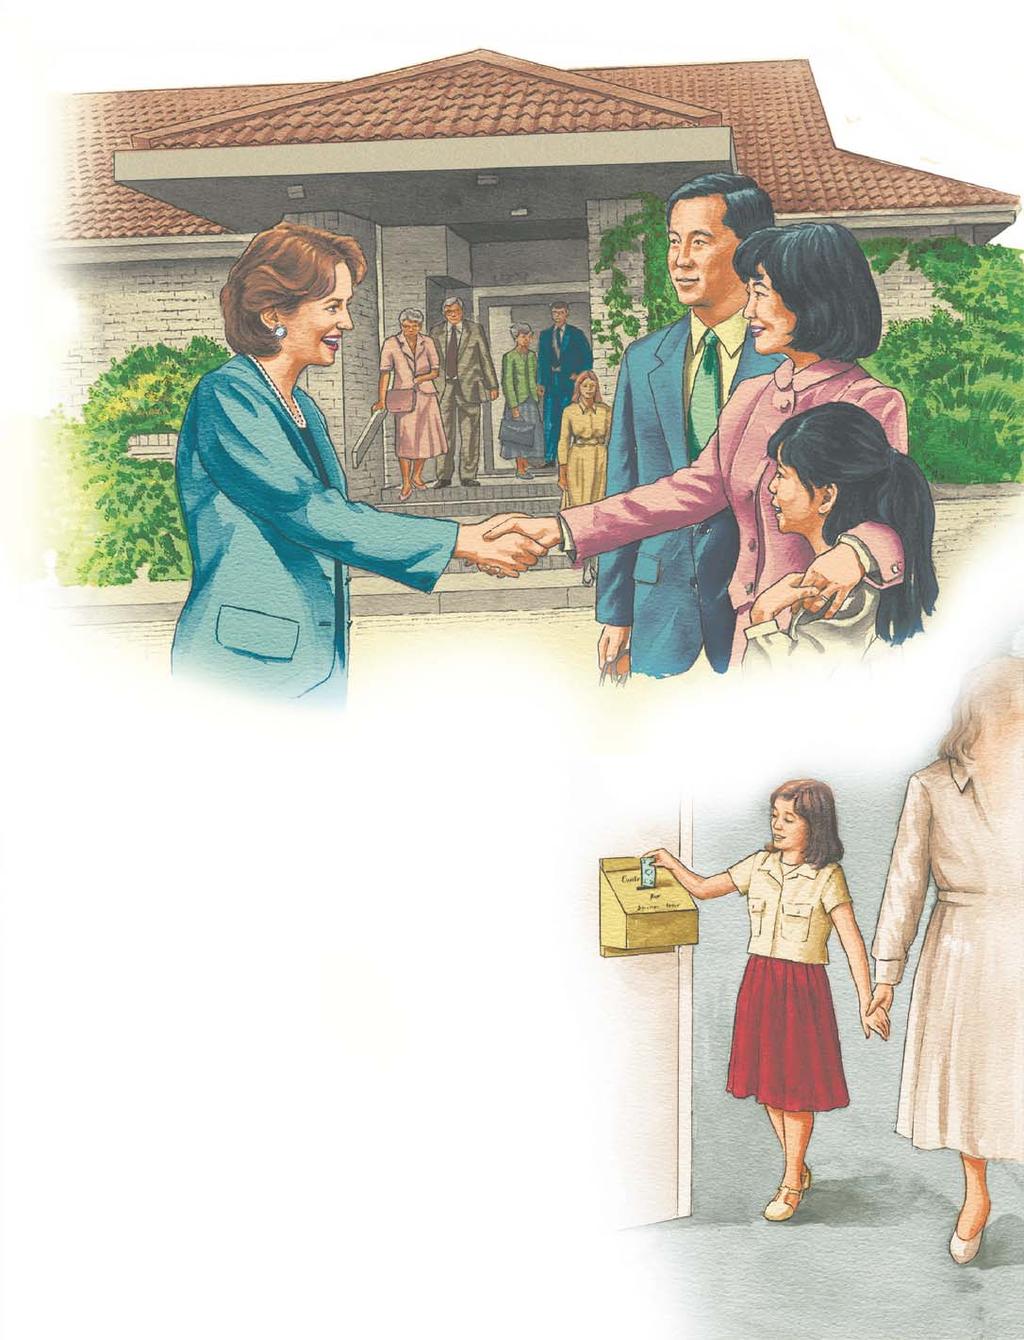 KINGDOM HALL of Jehovah s Witnesses Draw close to God s friends. He that is walking with wise persons will become wise. Proverbs 13:20. Attend meetings at the Kingdom Hall.